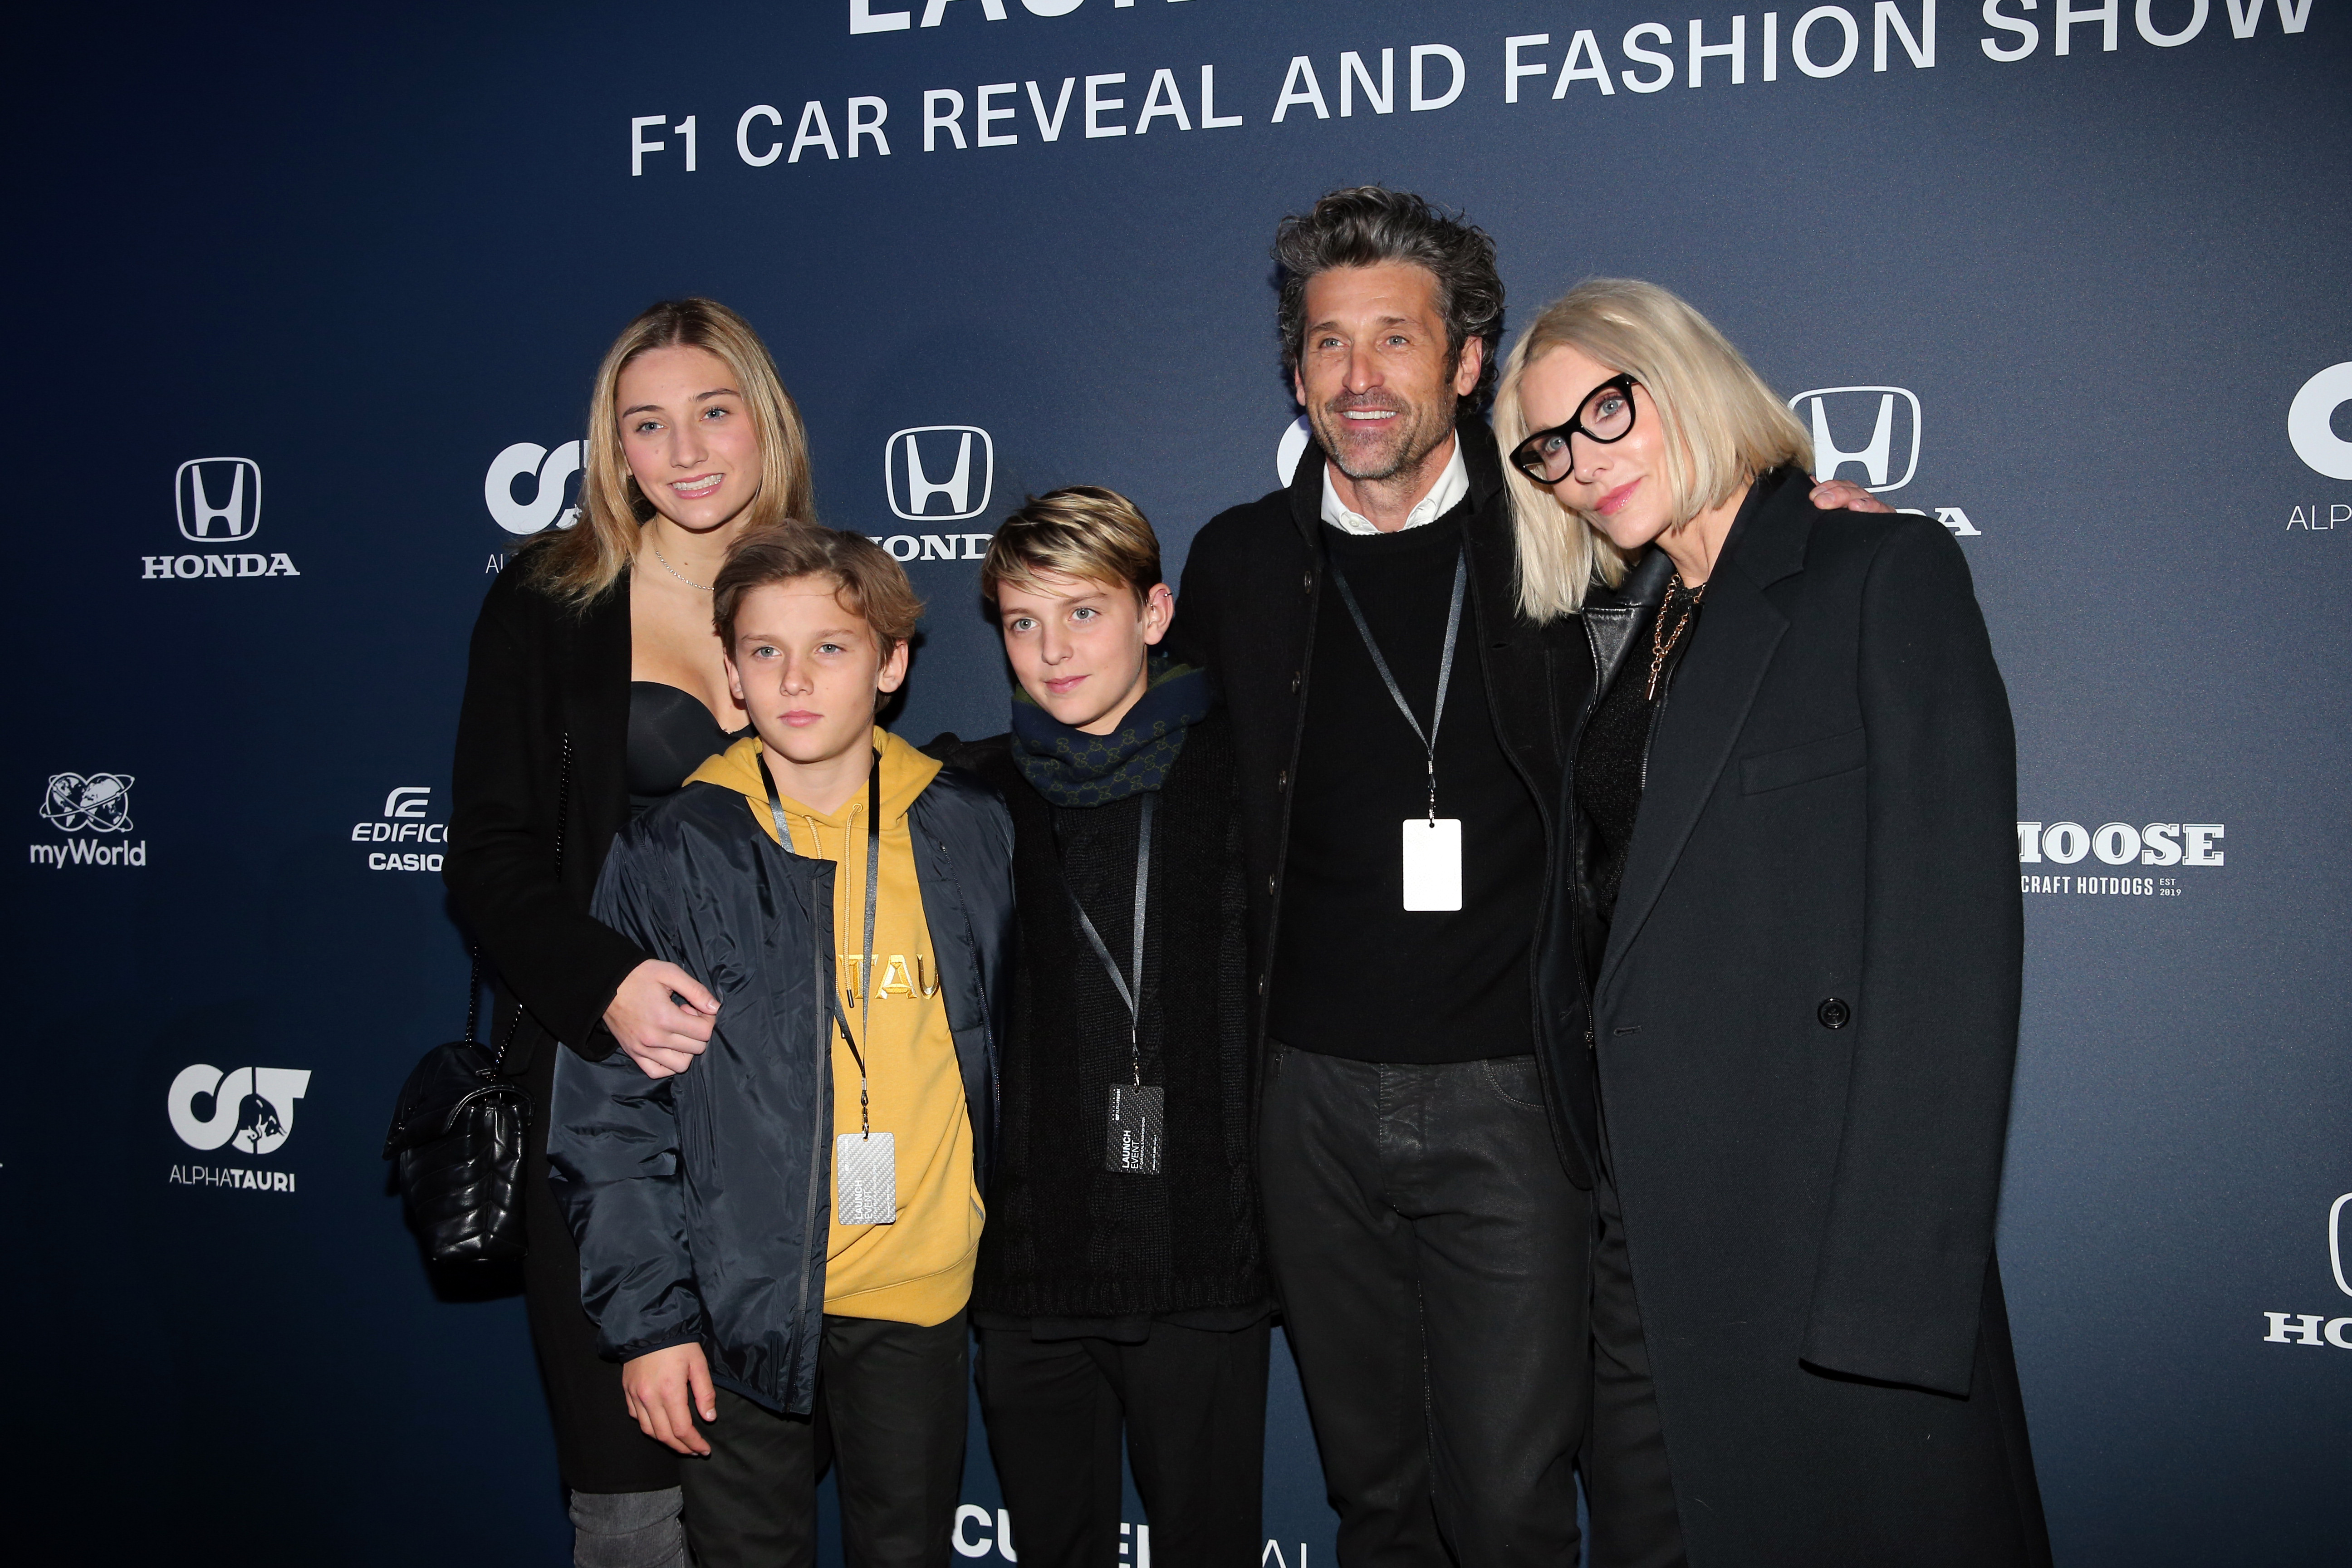 Patrick Dempsey, Jillian Fink, and their kids, Talula, Darby and Sullivan Dempsey at the Scuderia AlphaTauri Launch Event in Salzburg, 2020 | Source: Getty Images